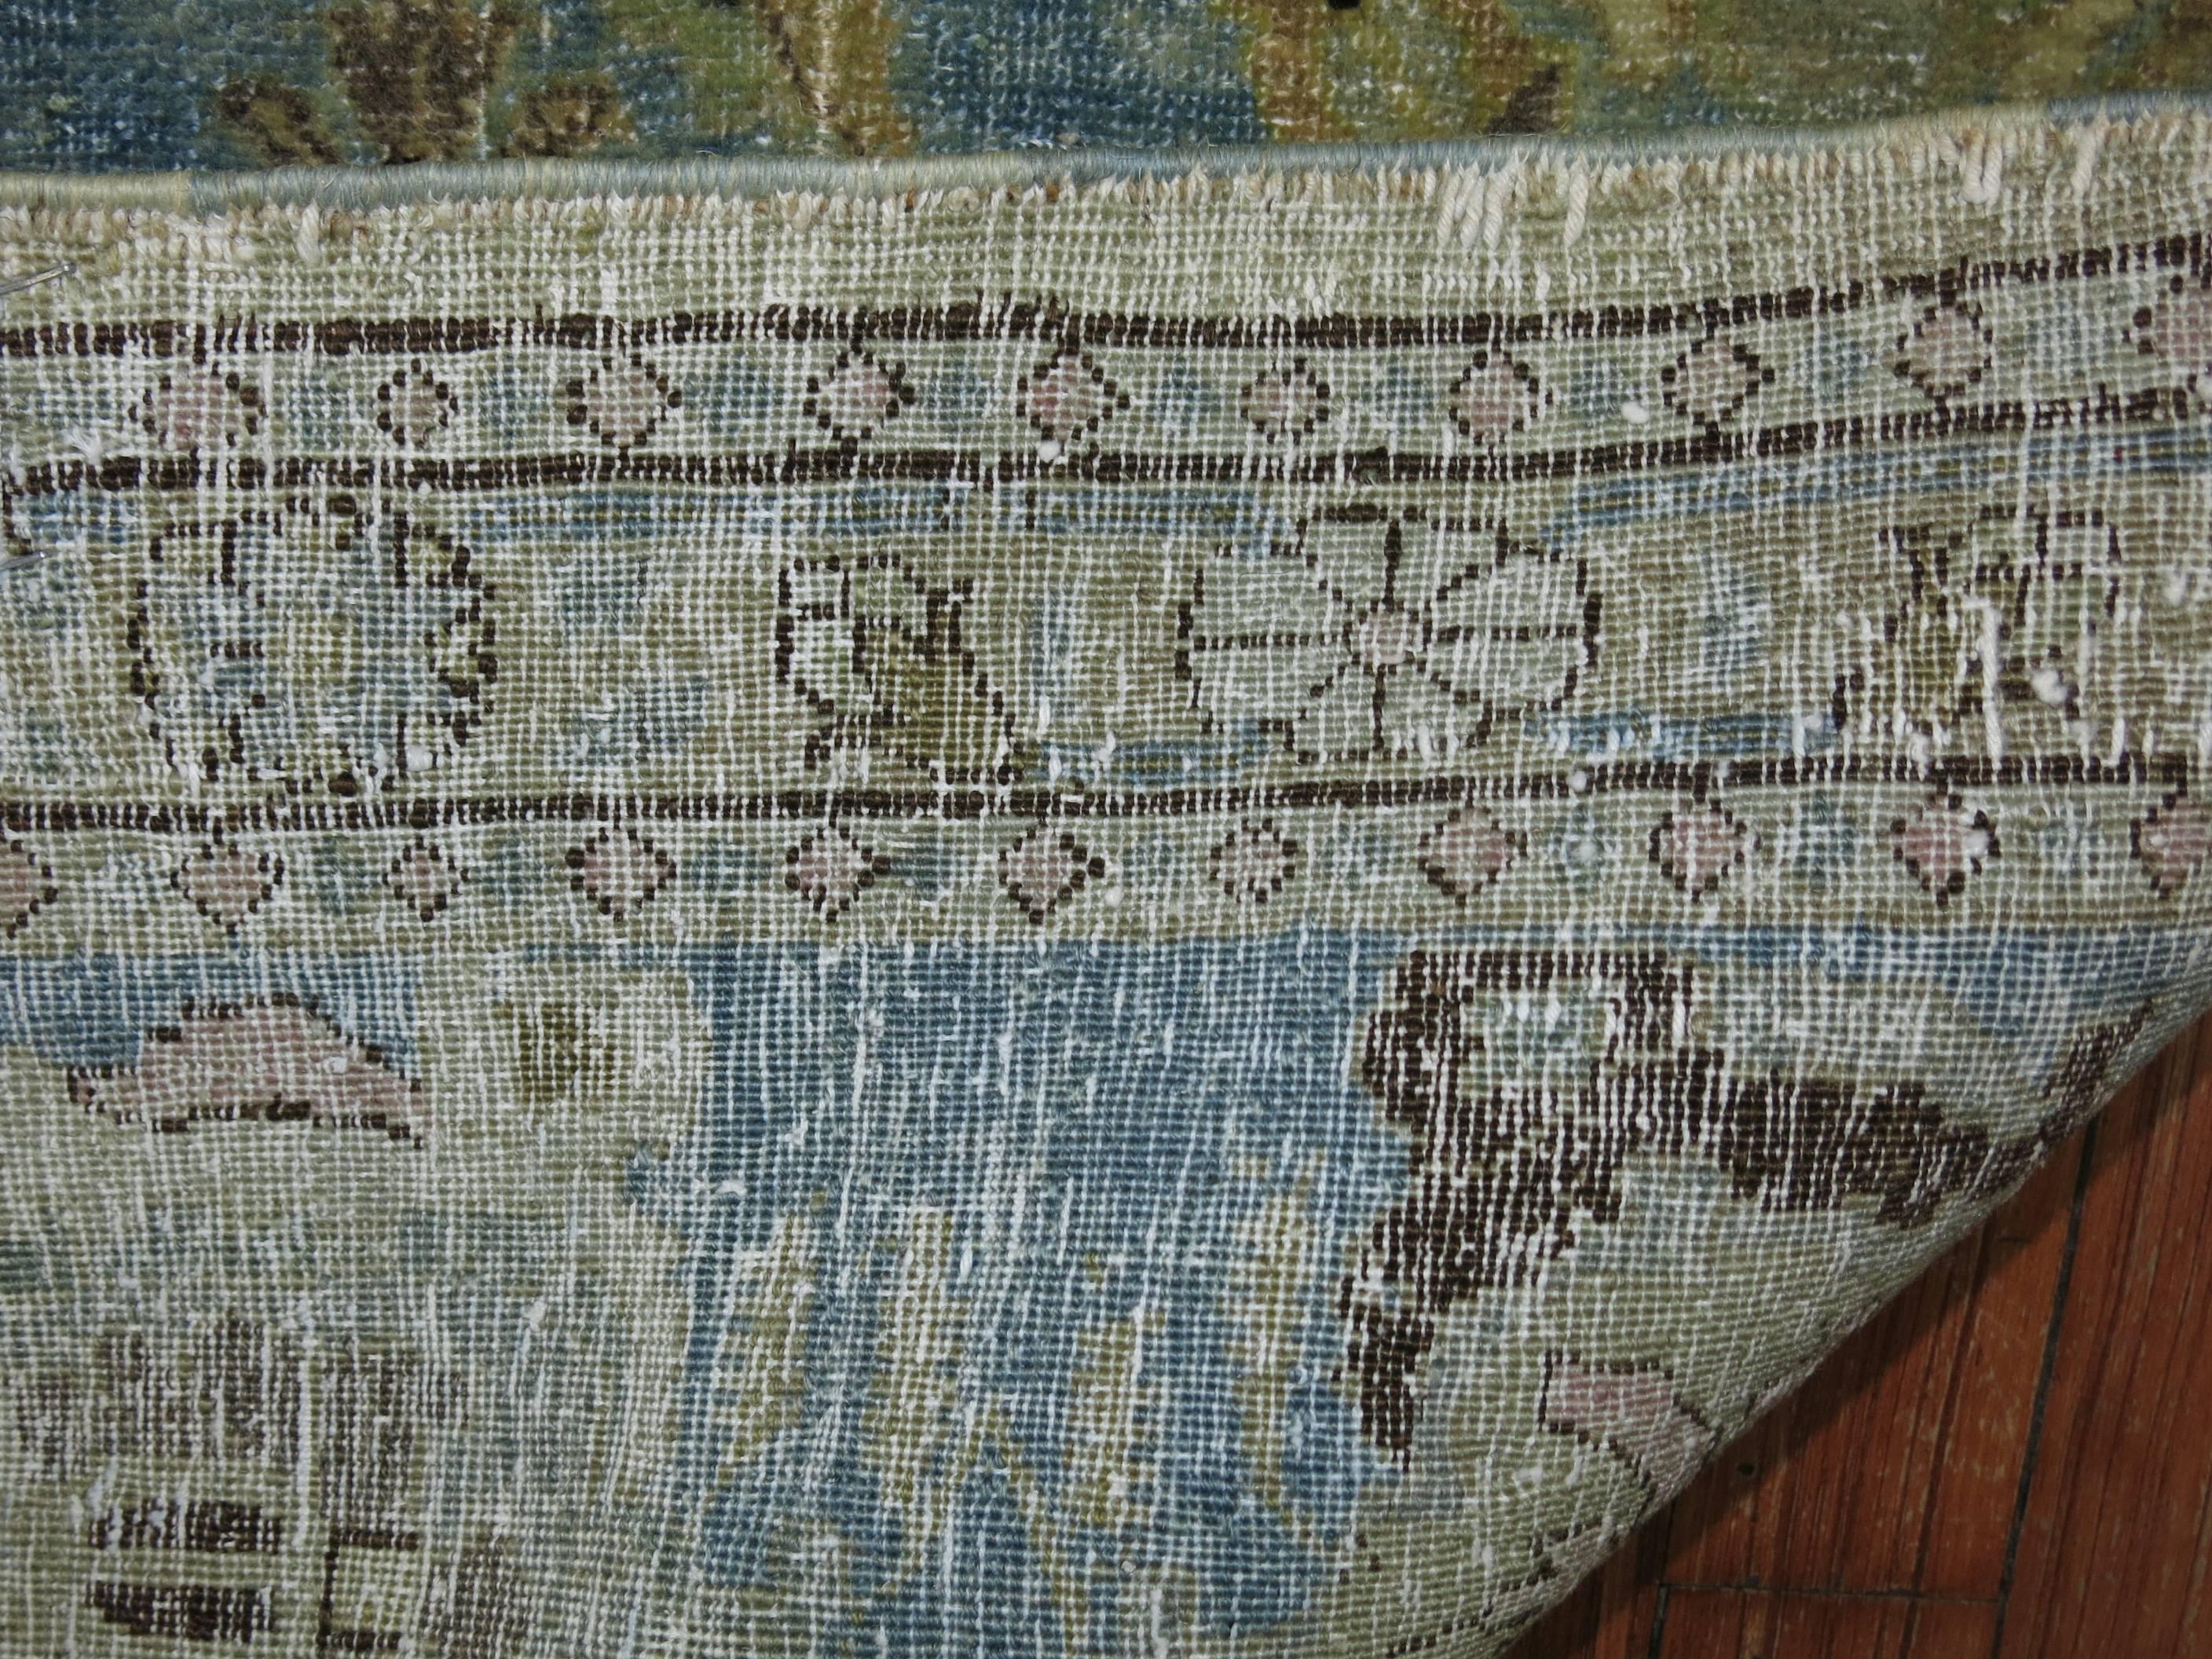 Early 20th century Persian Tabriz carpet in predominant sky blue tones. Accents in green and brown.

Although extremely difficult to procure because of their limited production and great demand, a small number of Tabriz carpets can still be found